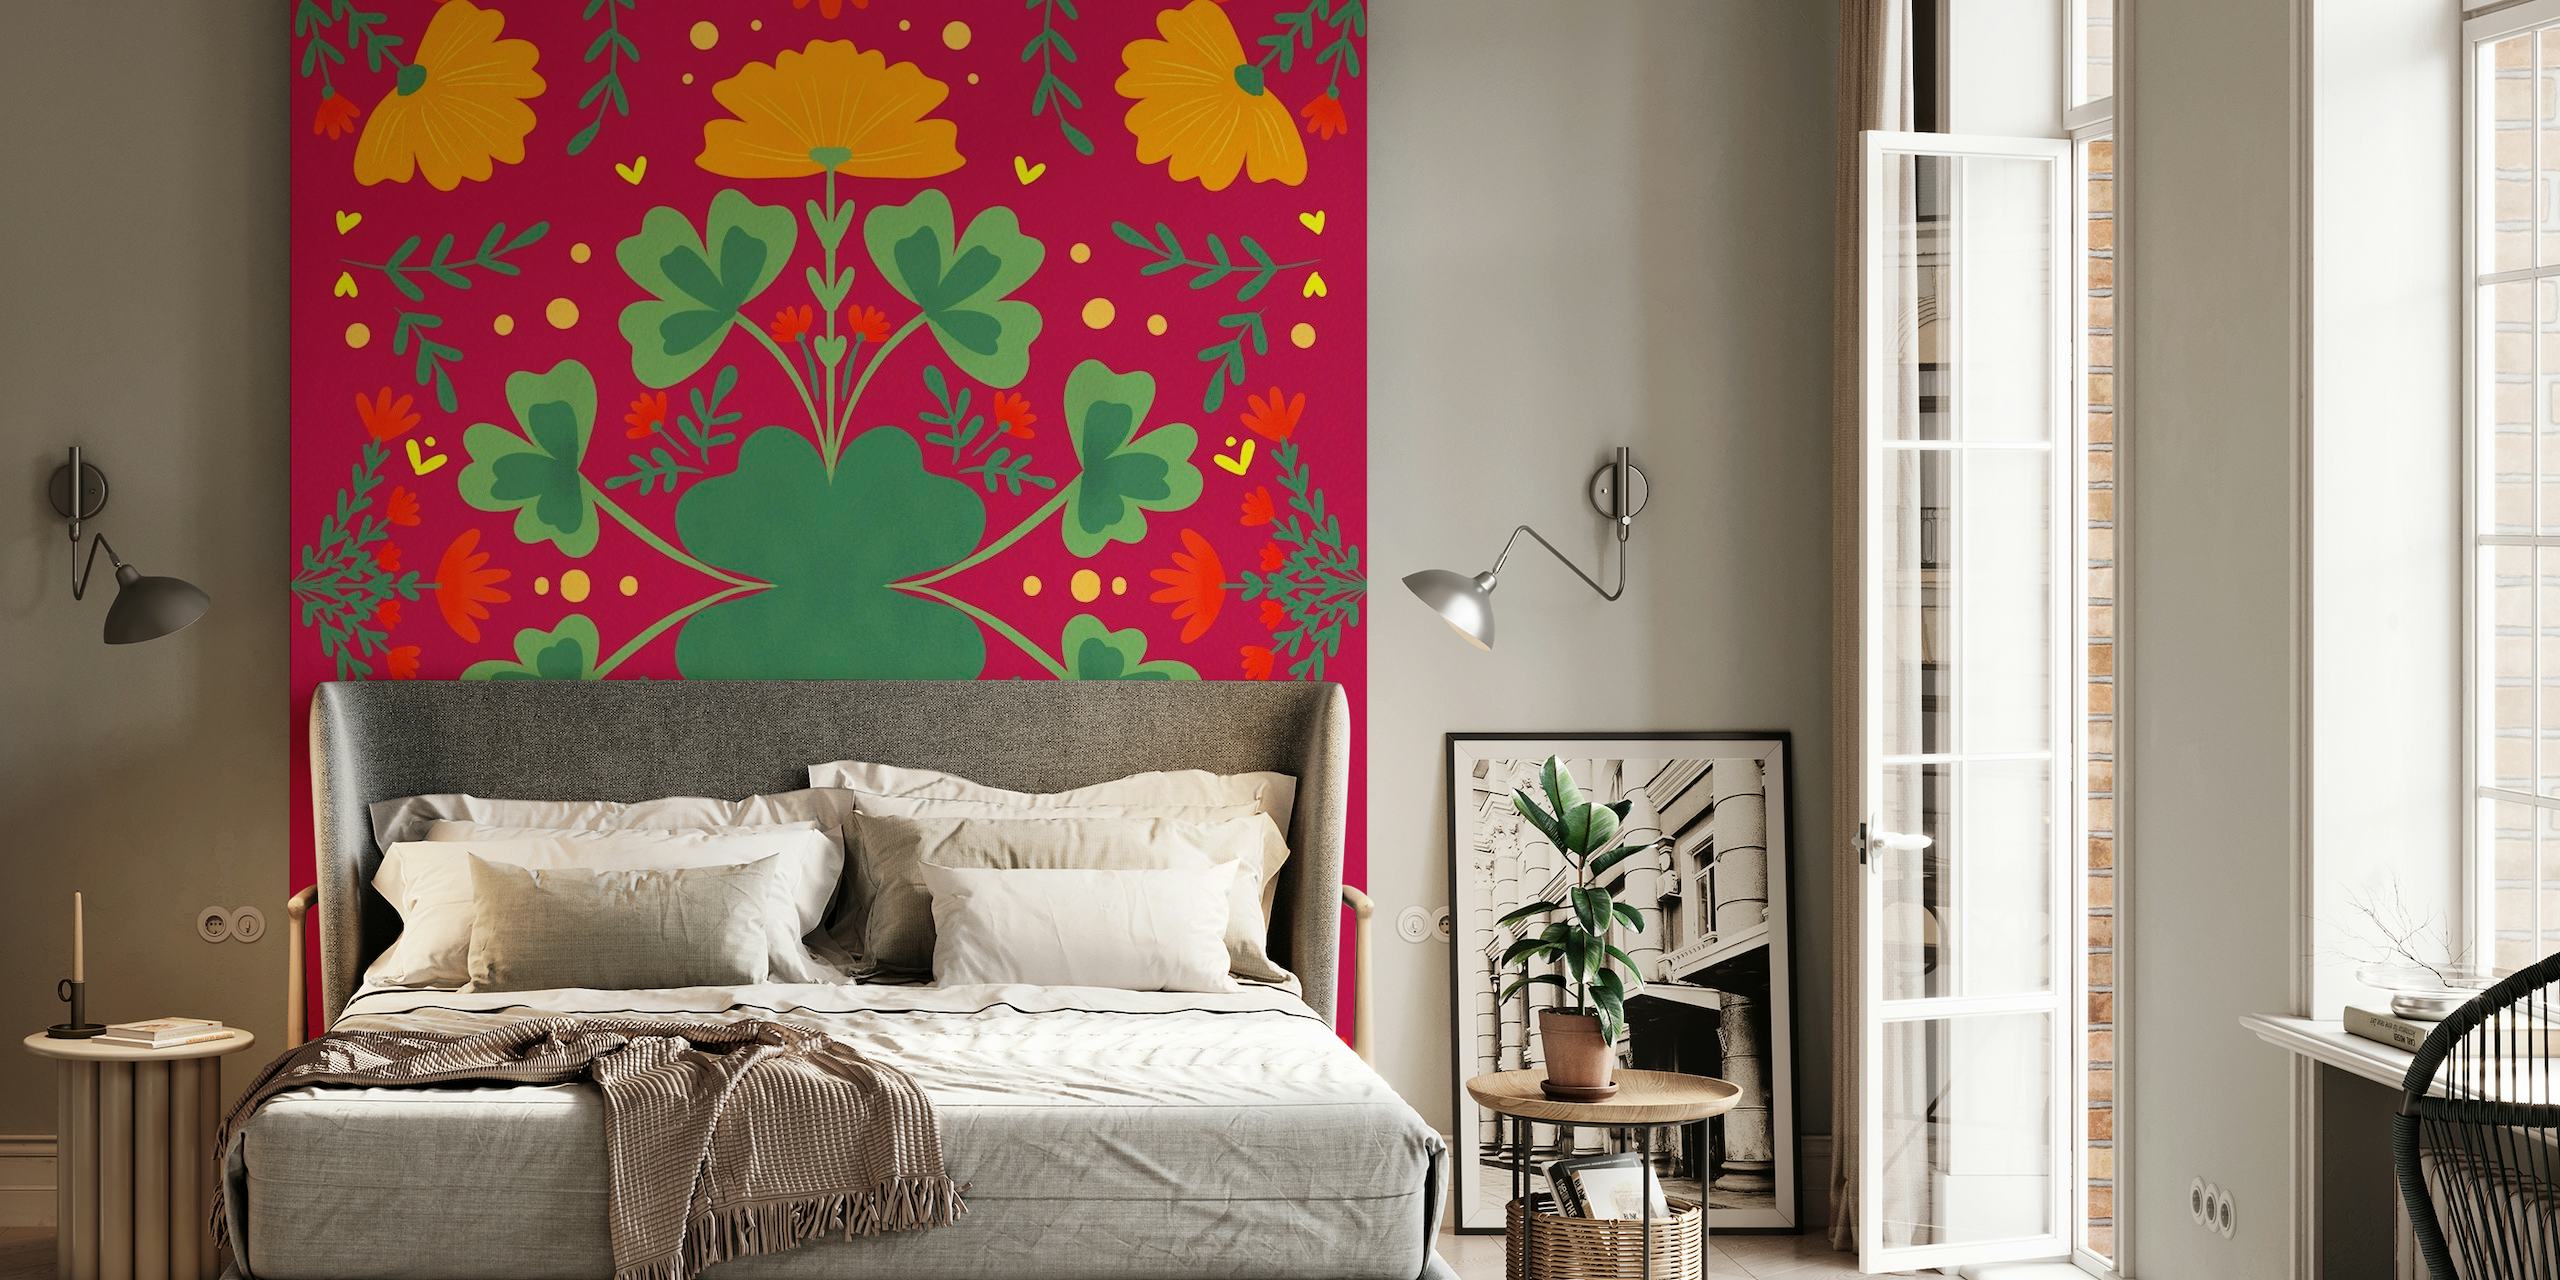 Floral pattern wall mural with green clovers and yellow and red flowers on a vivid red background